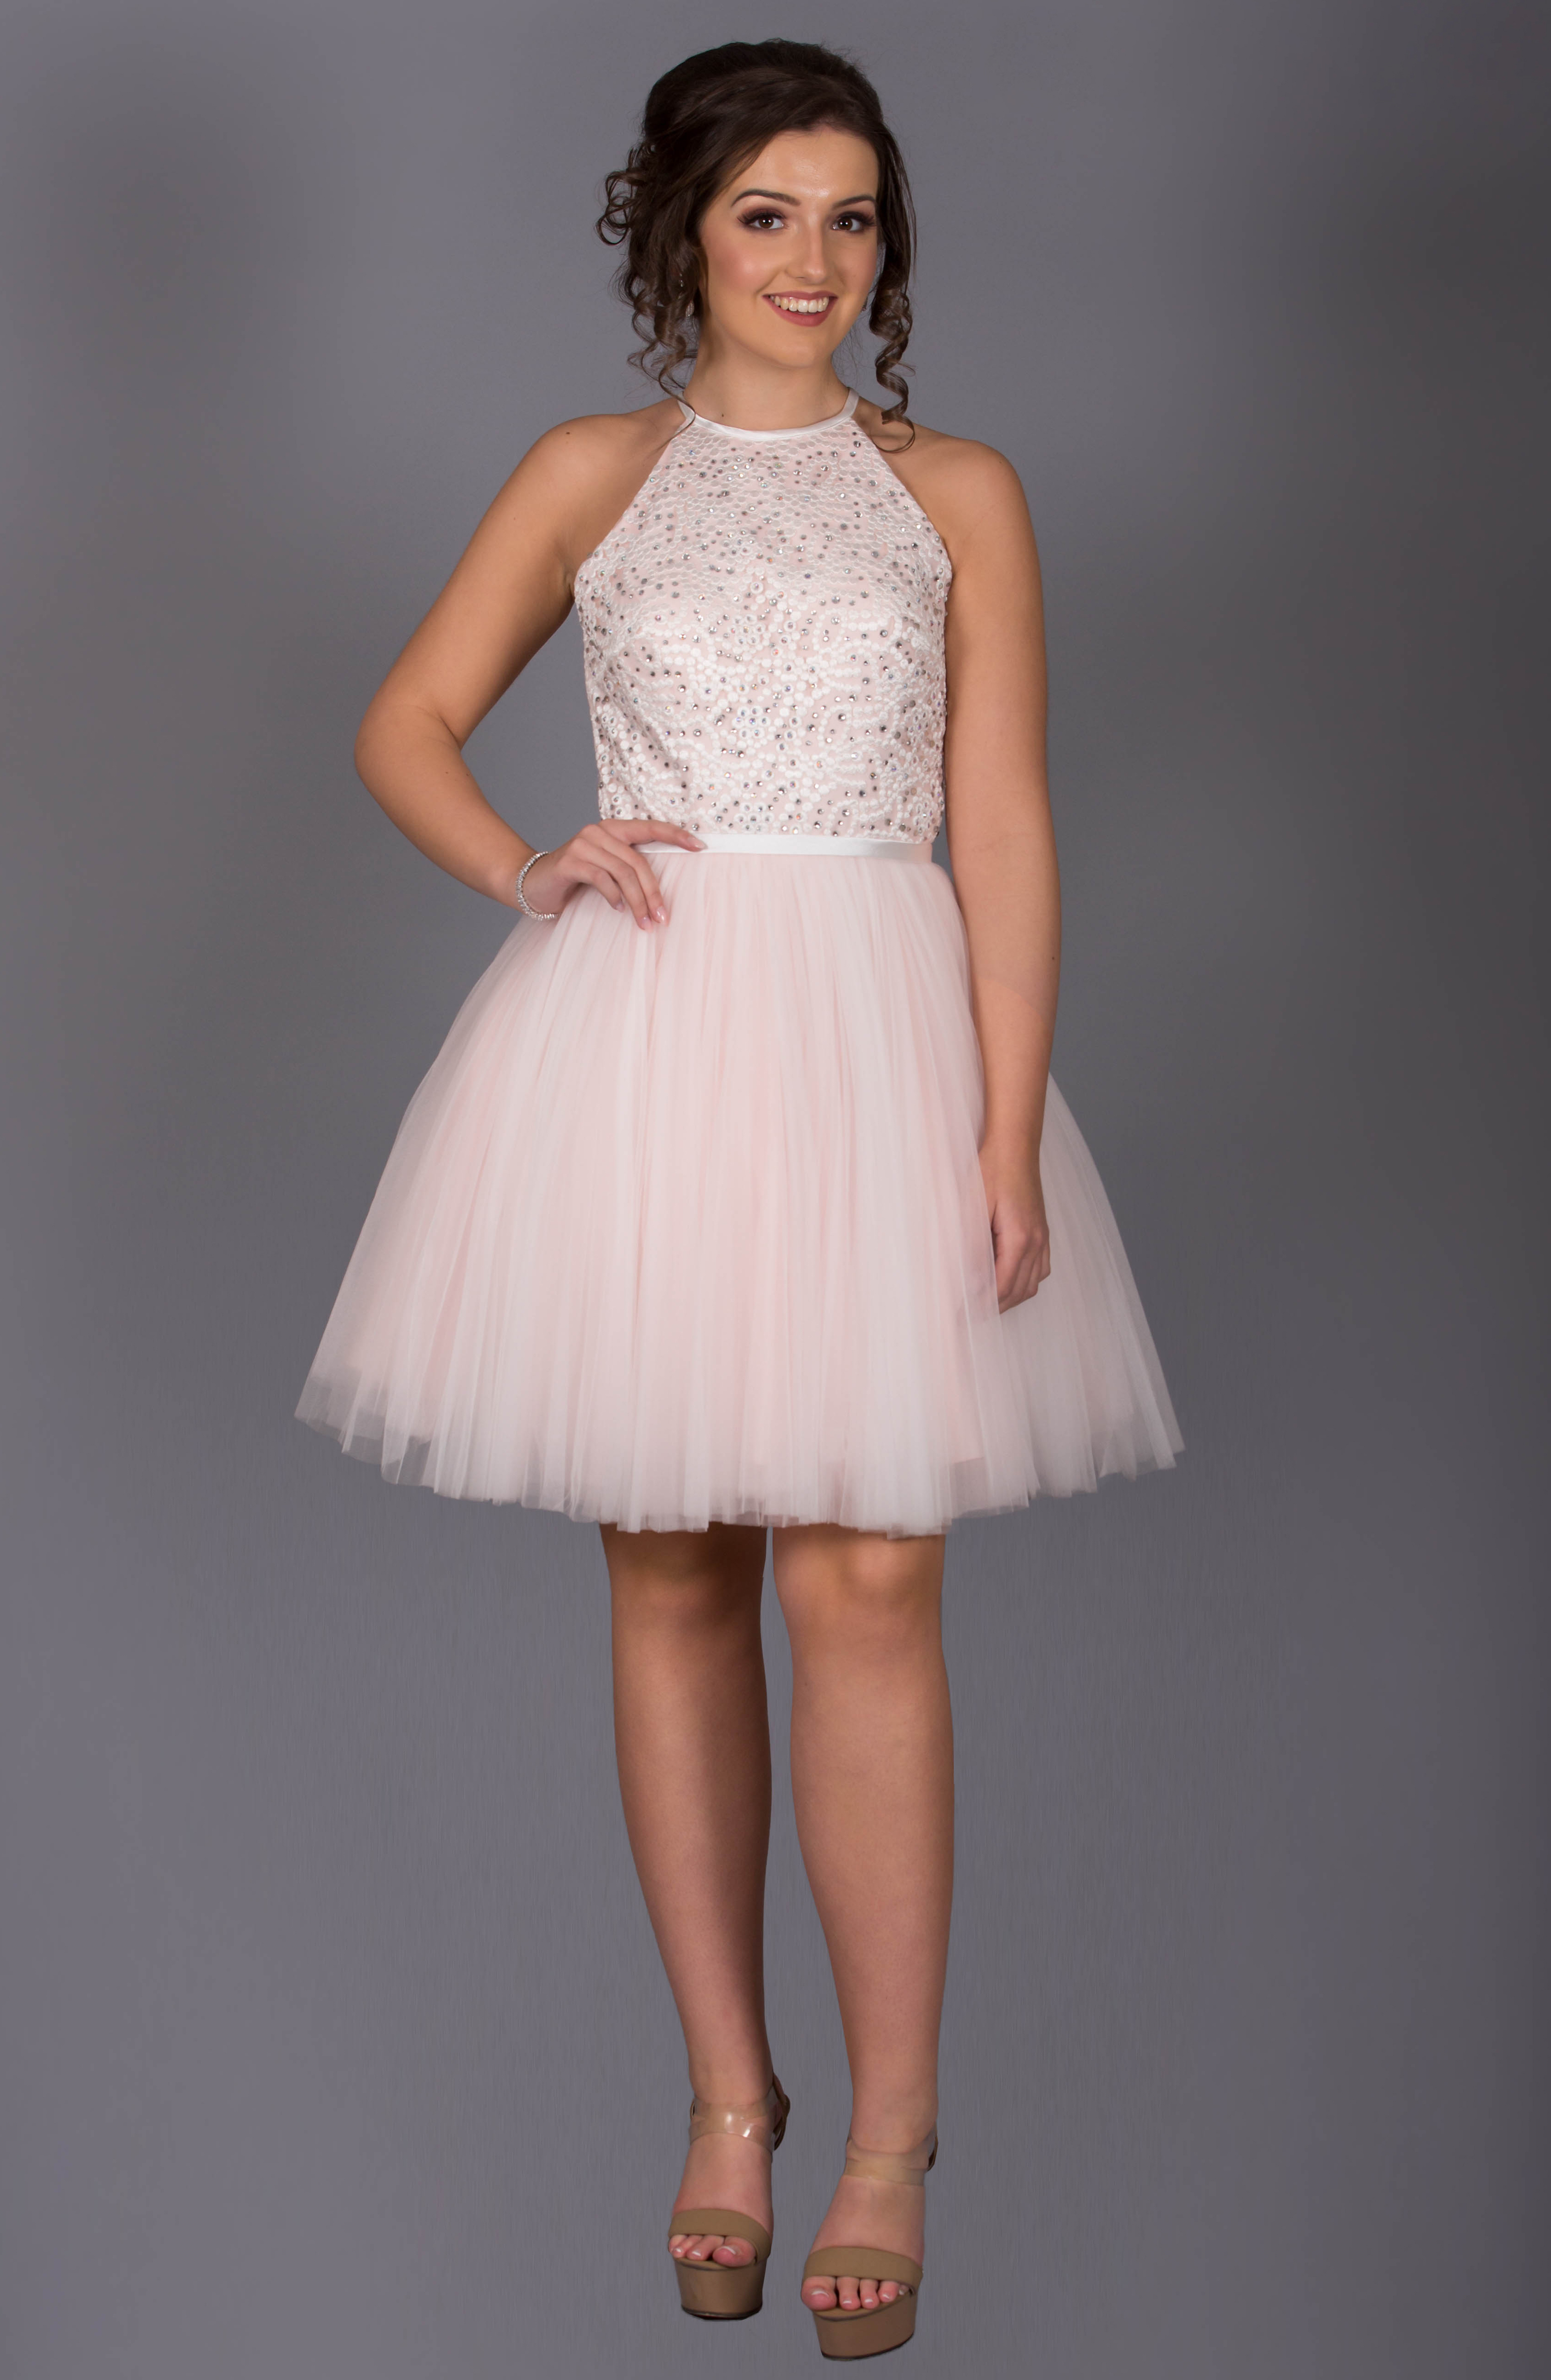 Short Dress With Full Tulle Skirt Afc08 Catherines Of Partick 5436